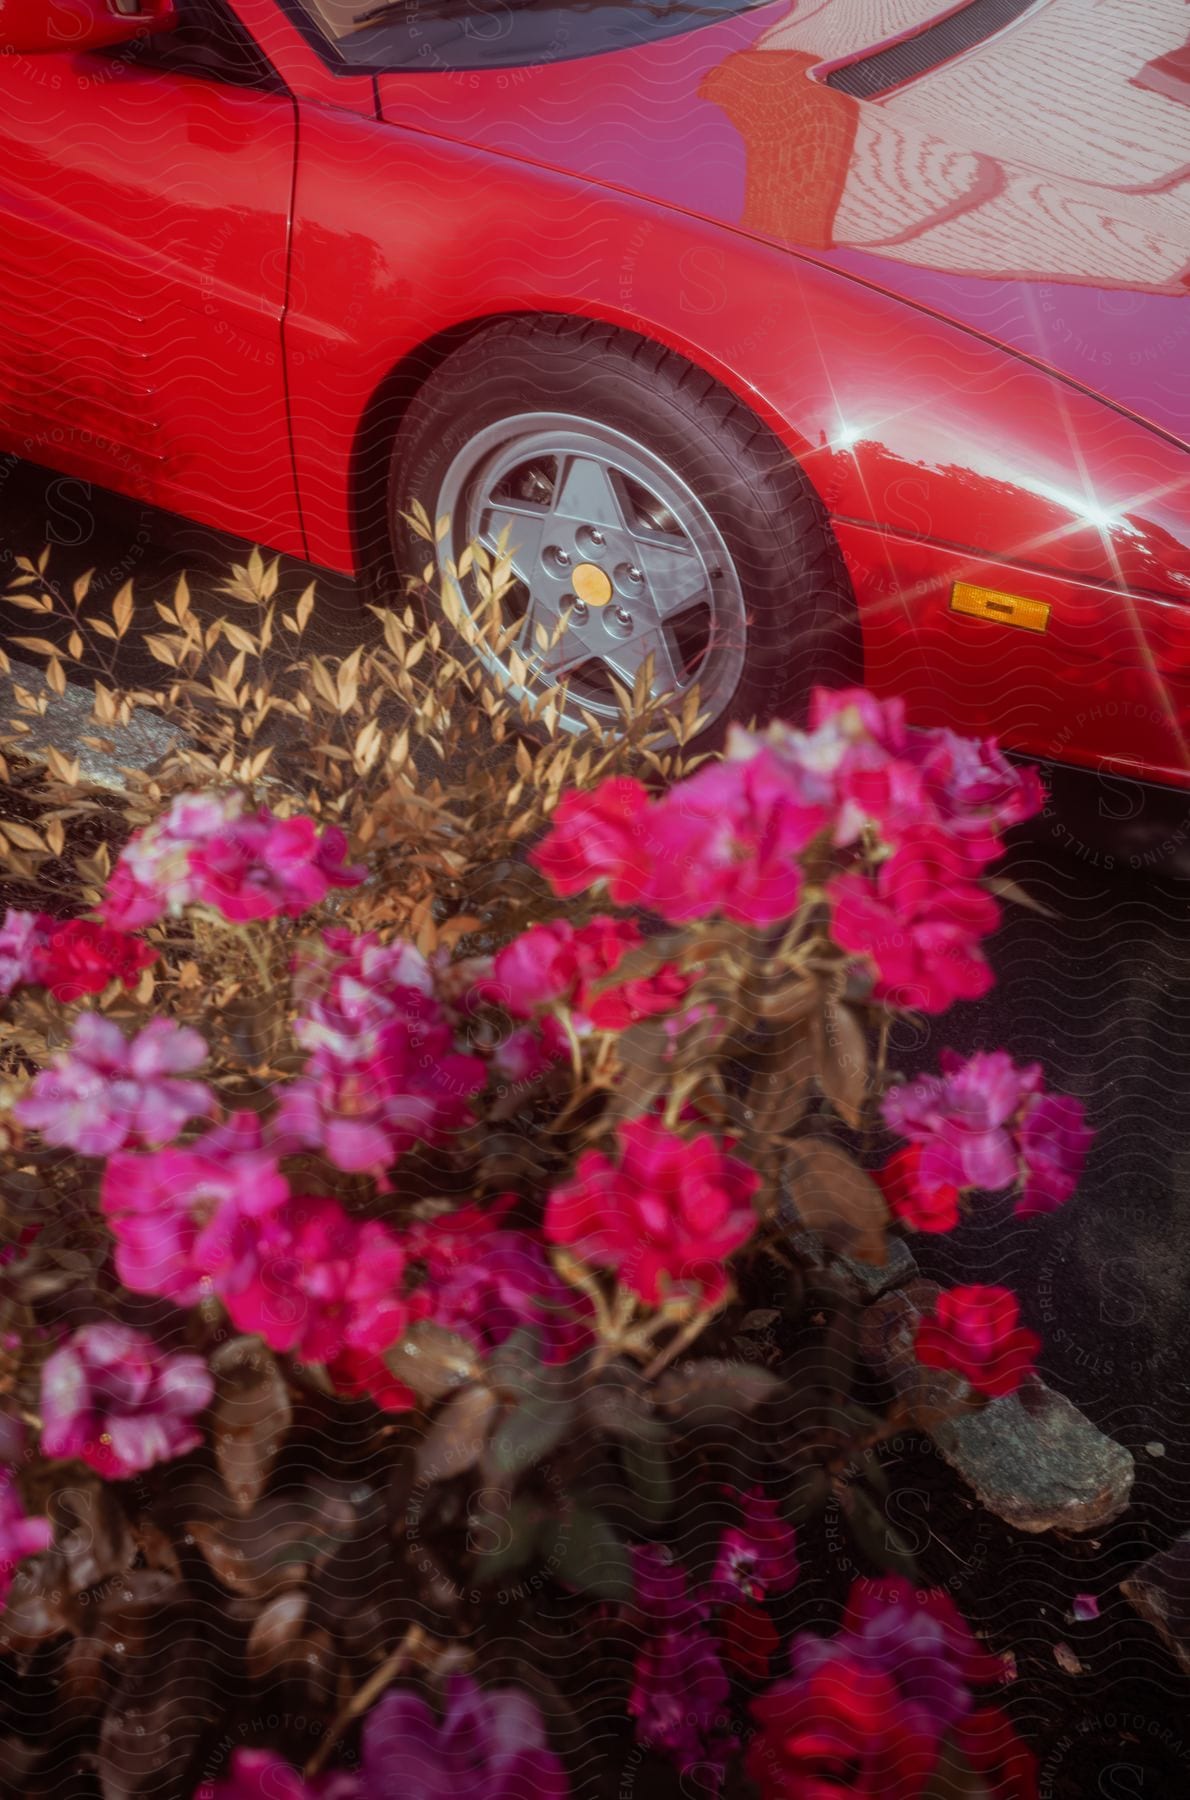 Red sports car parked next to flowers